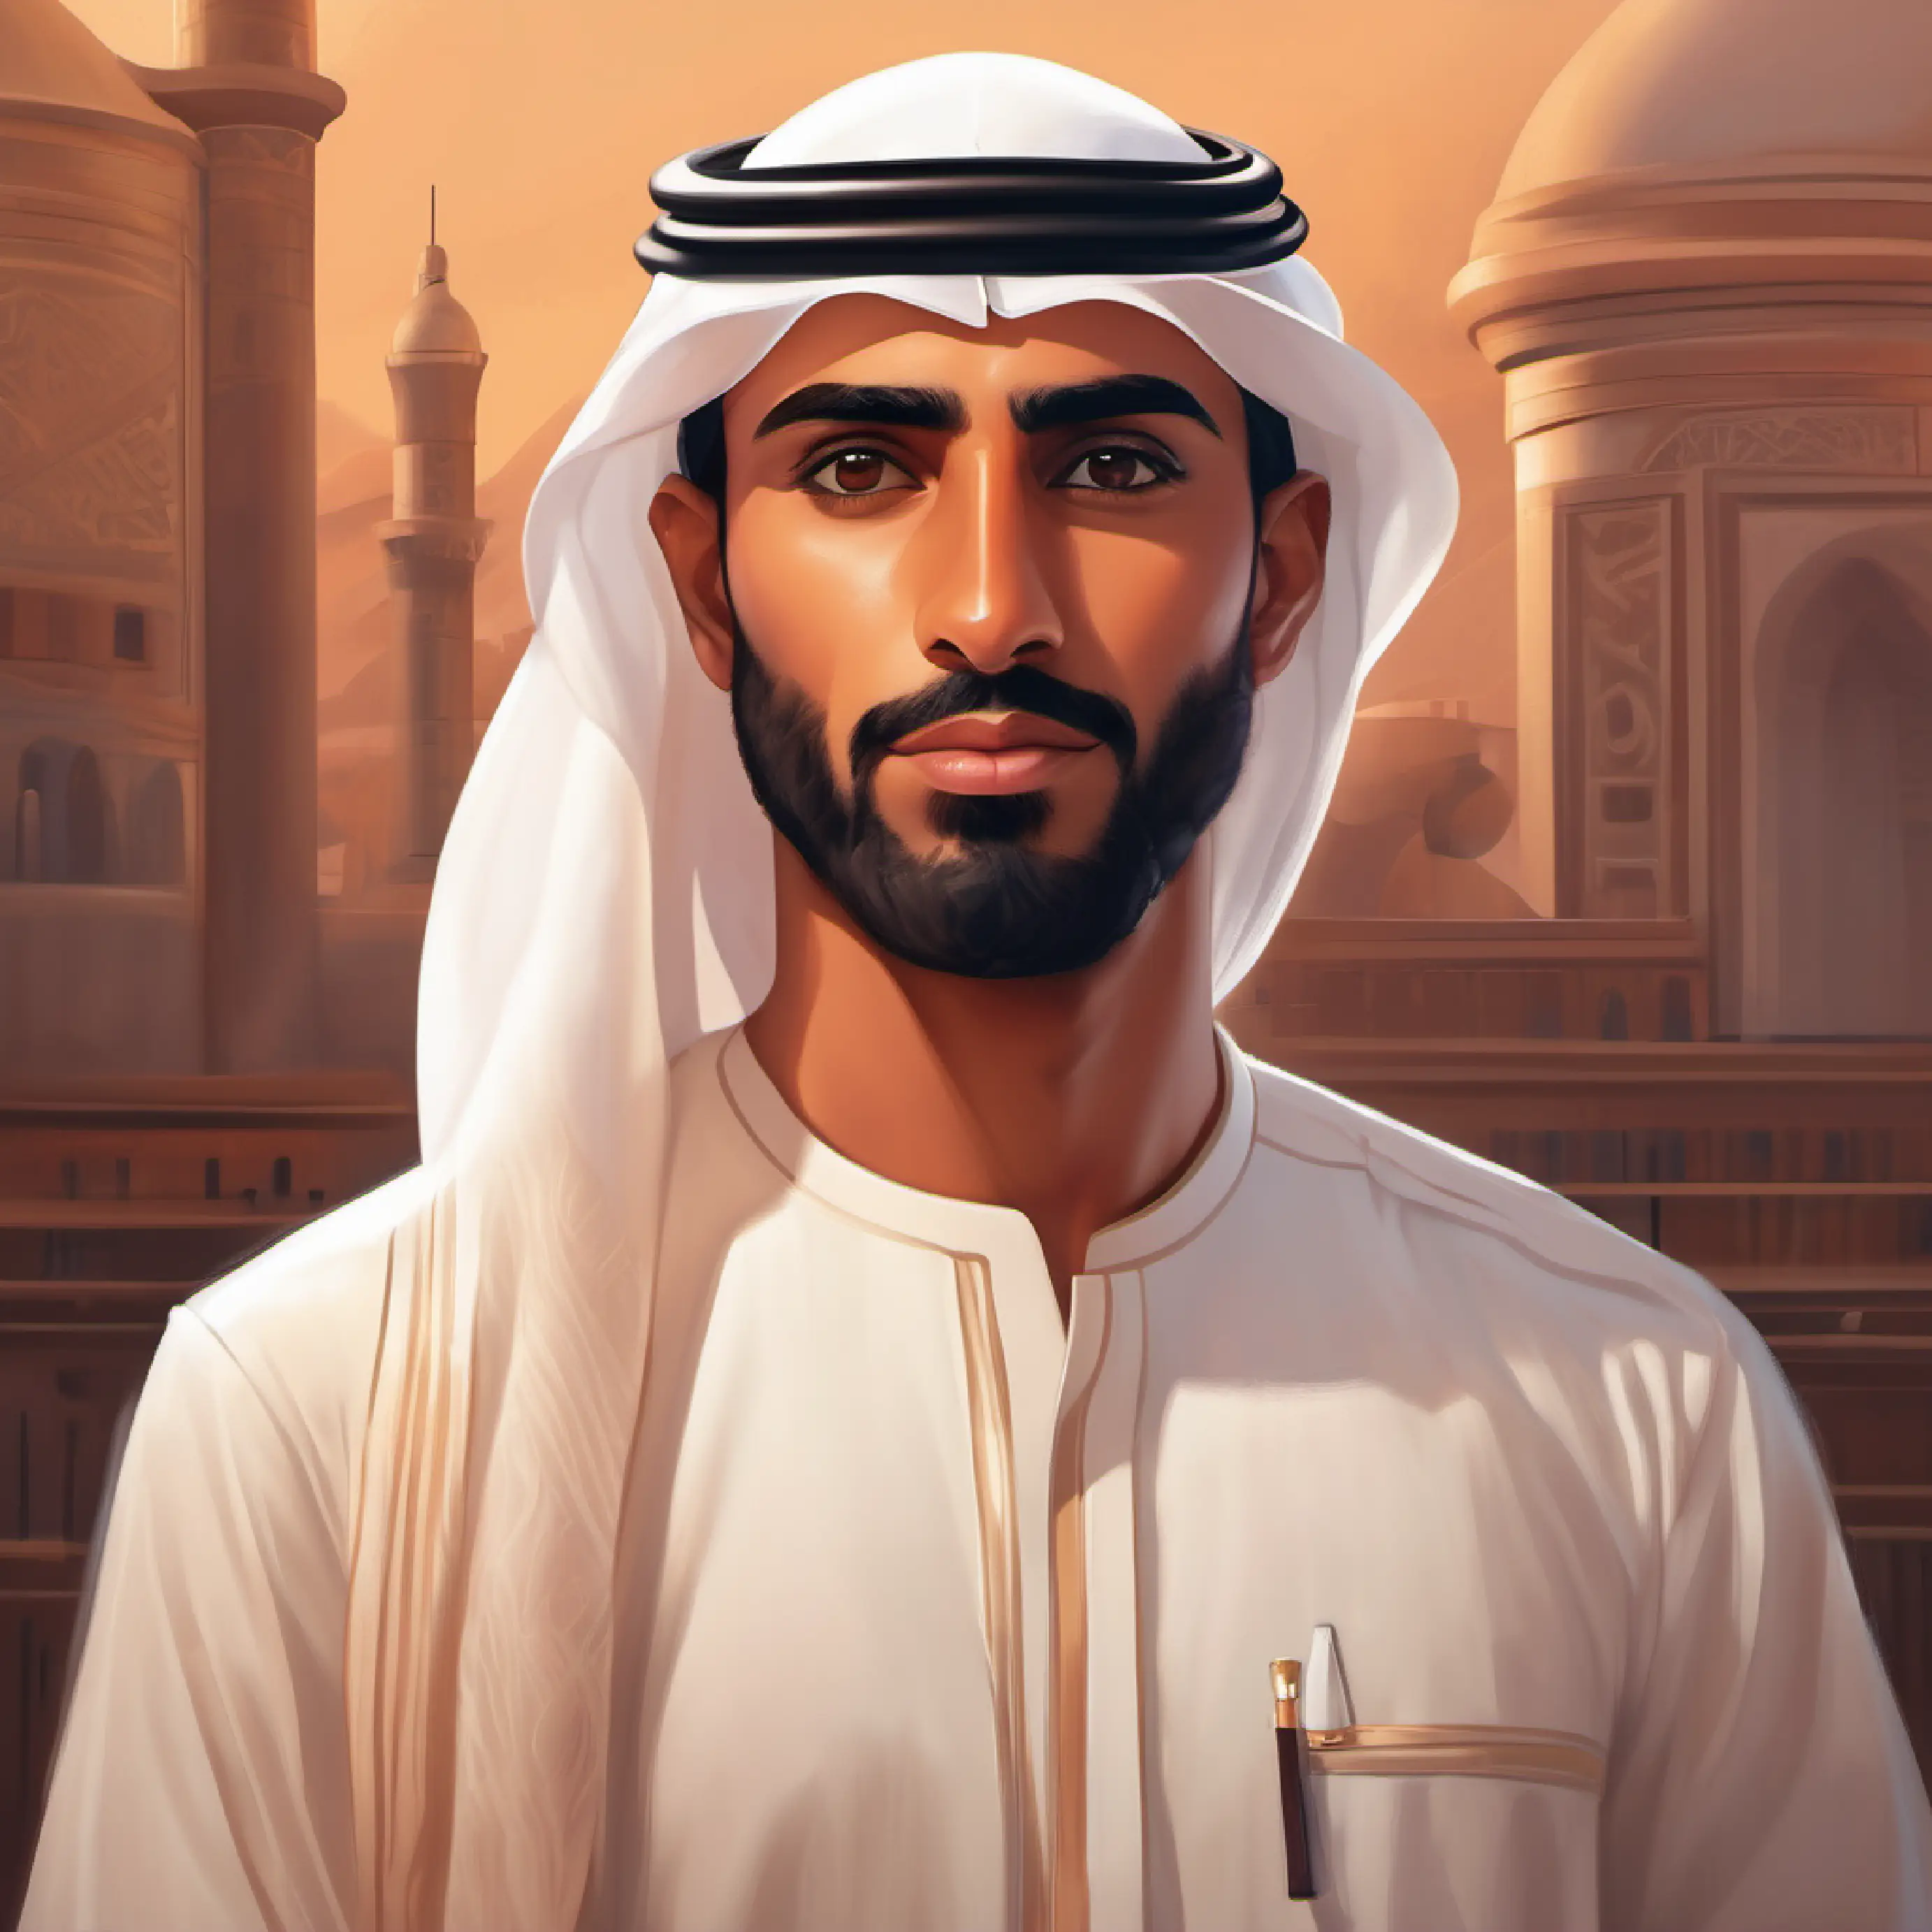 Young Emirati man, bronze skin, earnest dark eyes, with a scientific gaze experiencing setbacks, yet finding solutions.